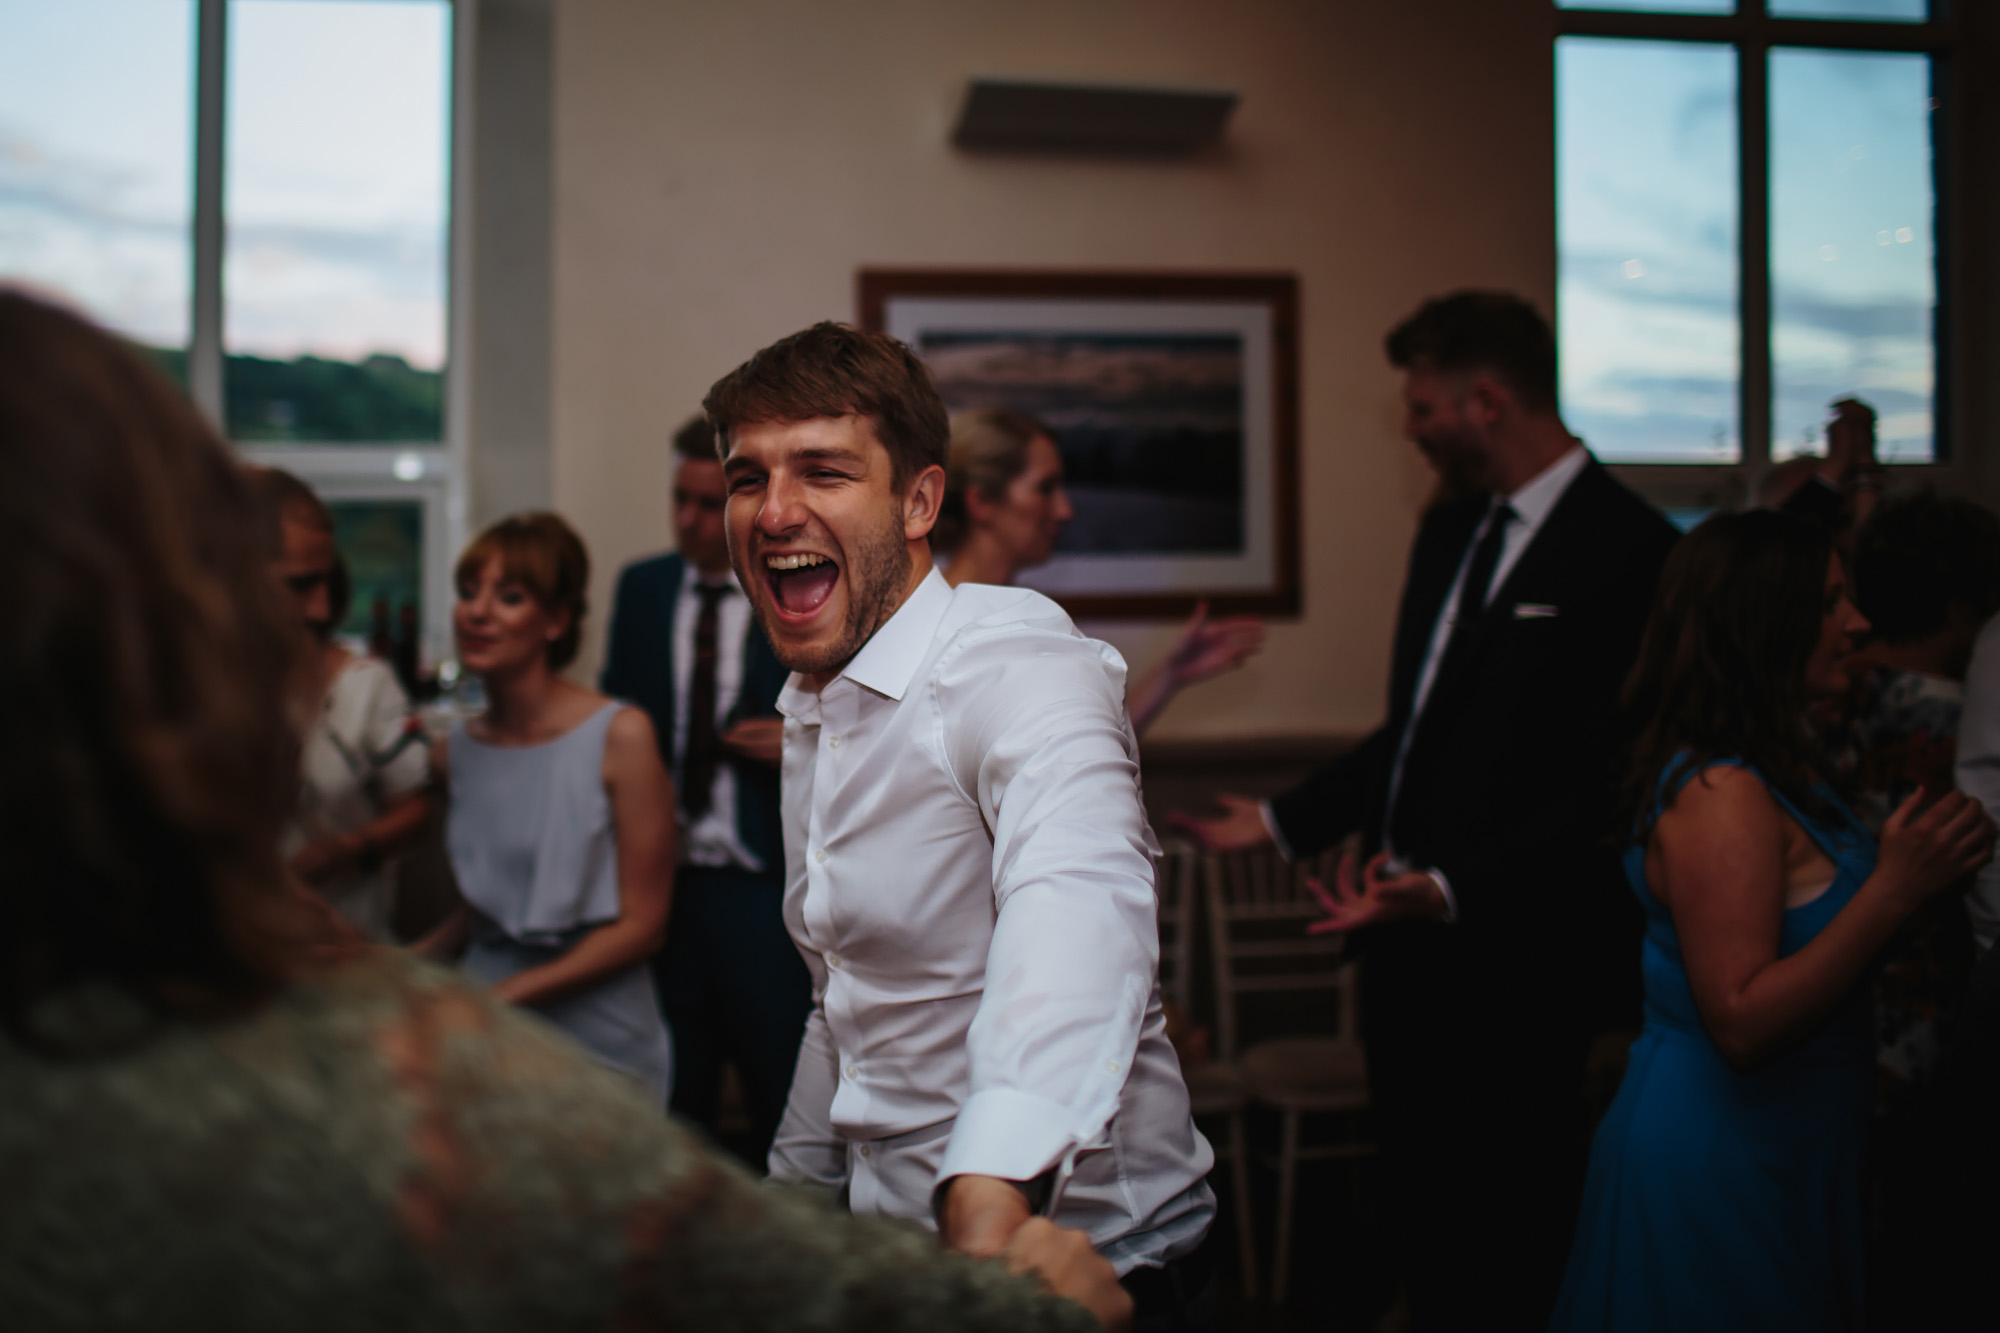 Guests laughing and dancing at a wedding